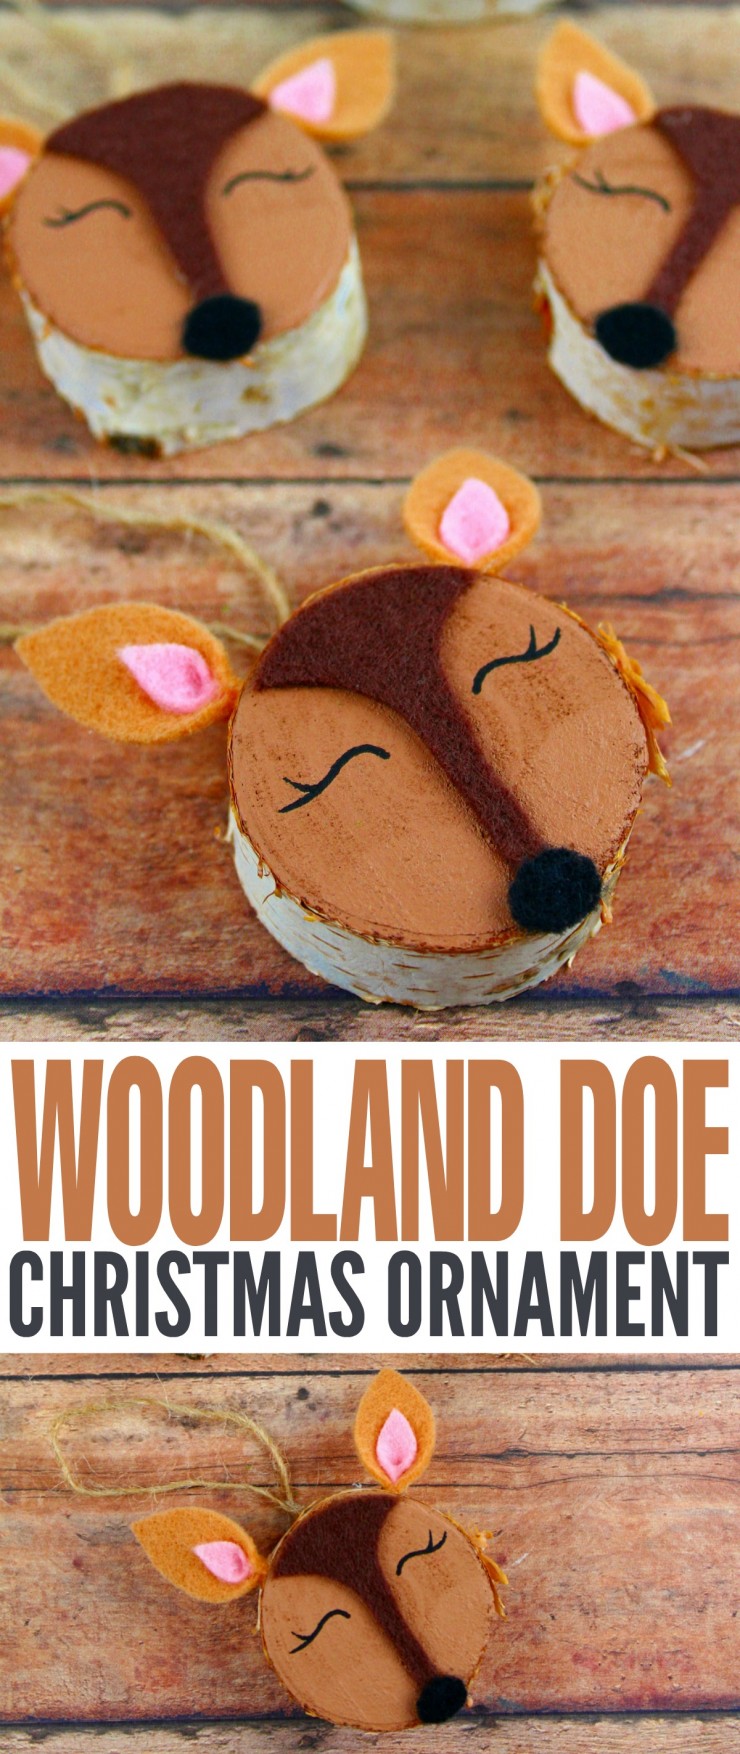 These Wood Slice Woodland Doe Ornaments are an adorable and festive holiday craft that make for great gifts and look great on a Christmas tree. We had so much fun making these rustic Christmas ornaments!